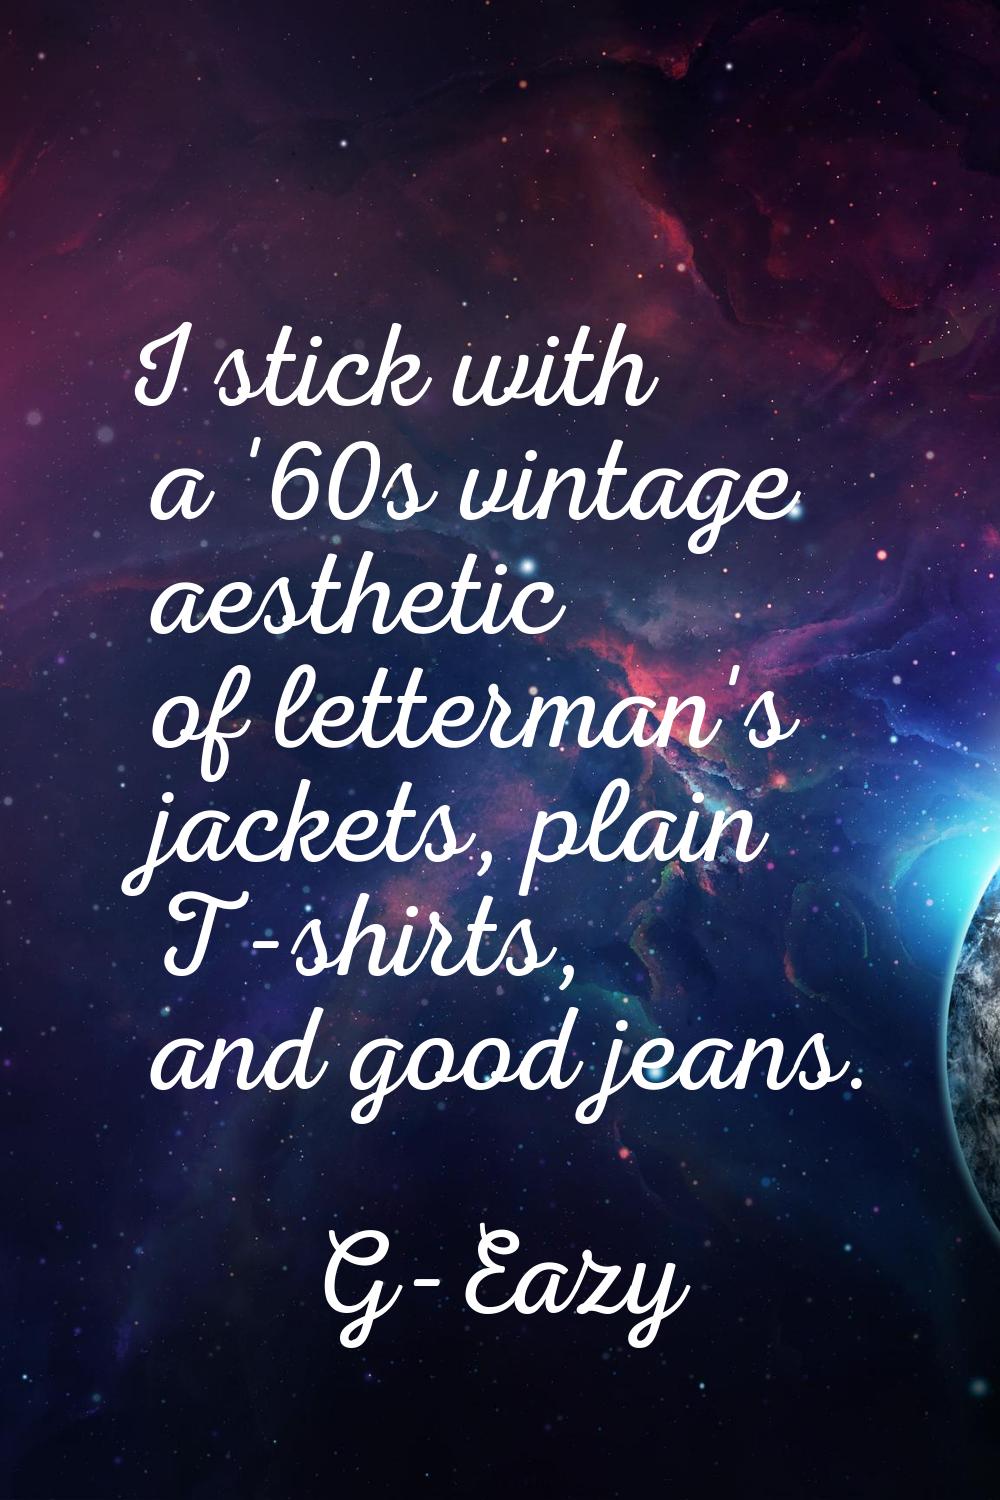 I stick with a '60s vintage aesthetic of letterman's jackets, plain T-shirts, and good jeans.